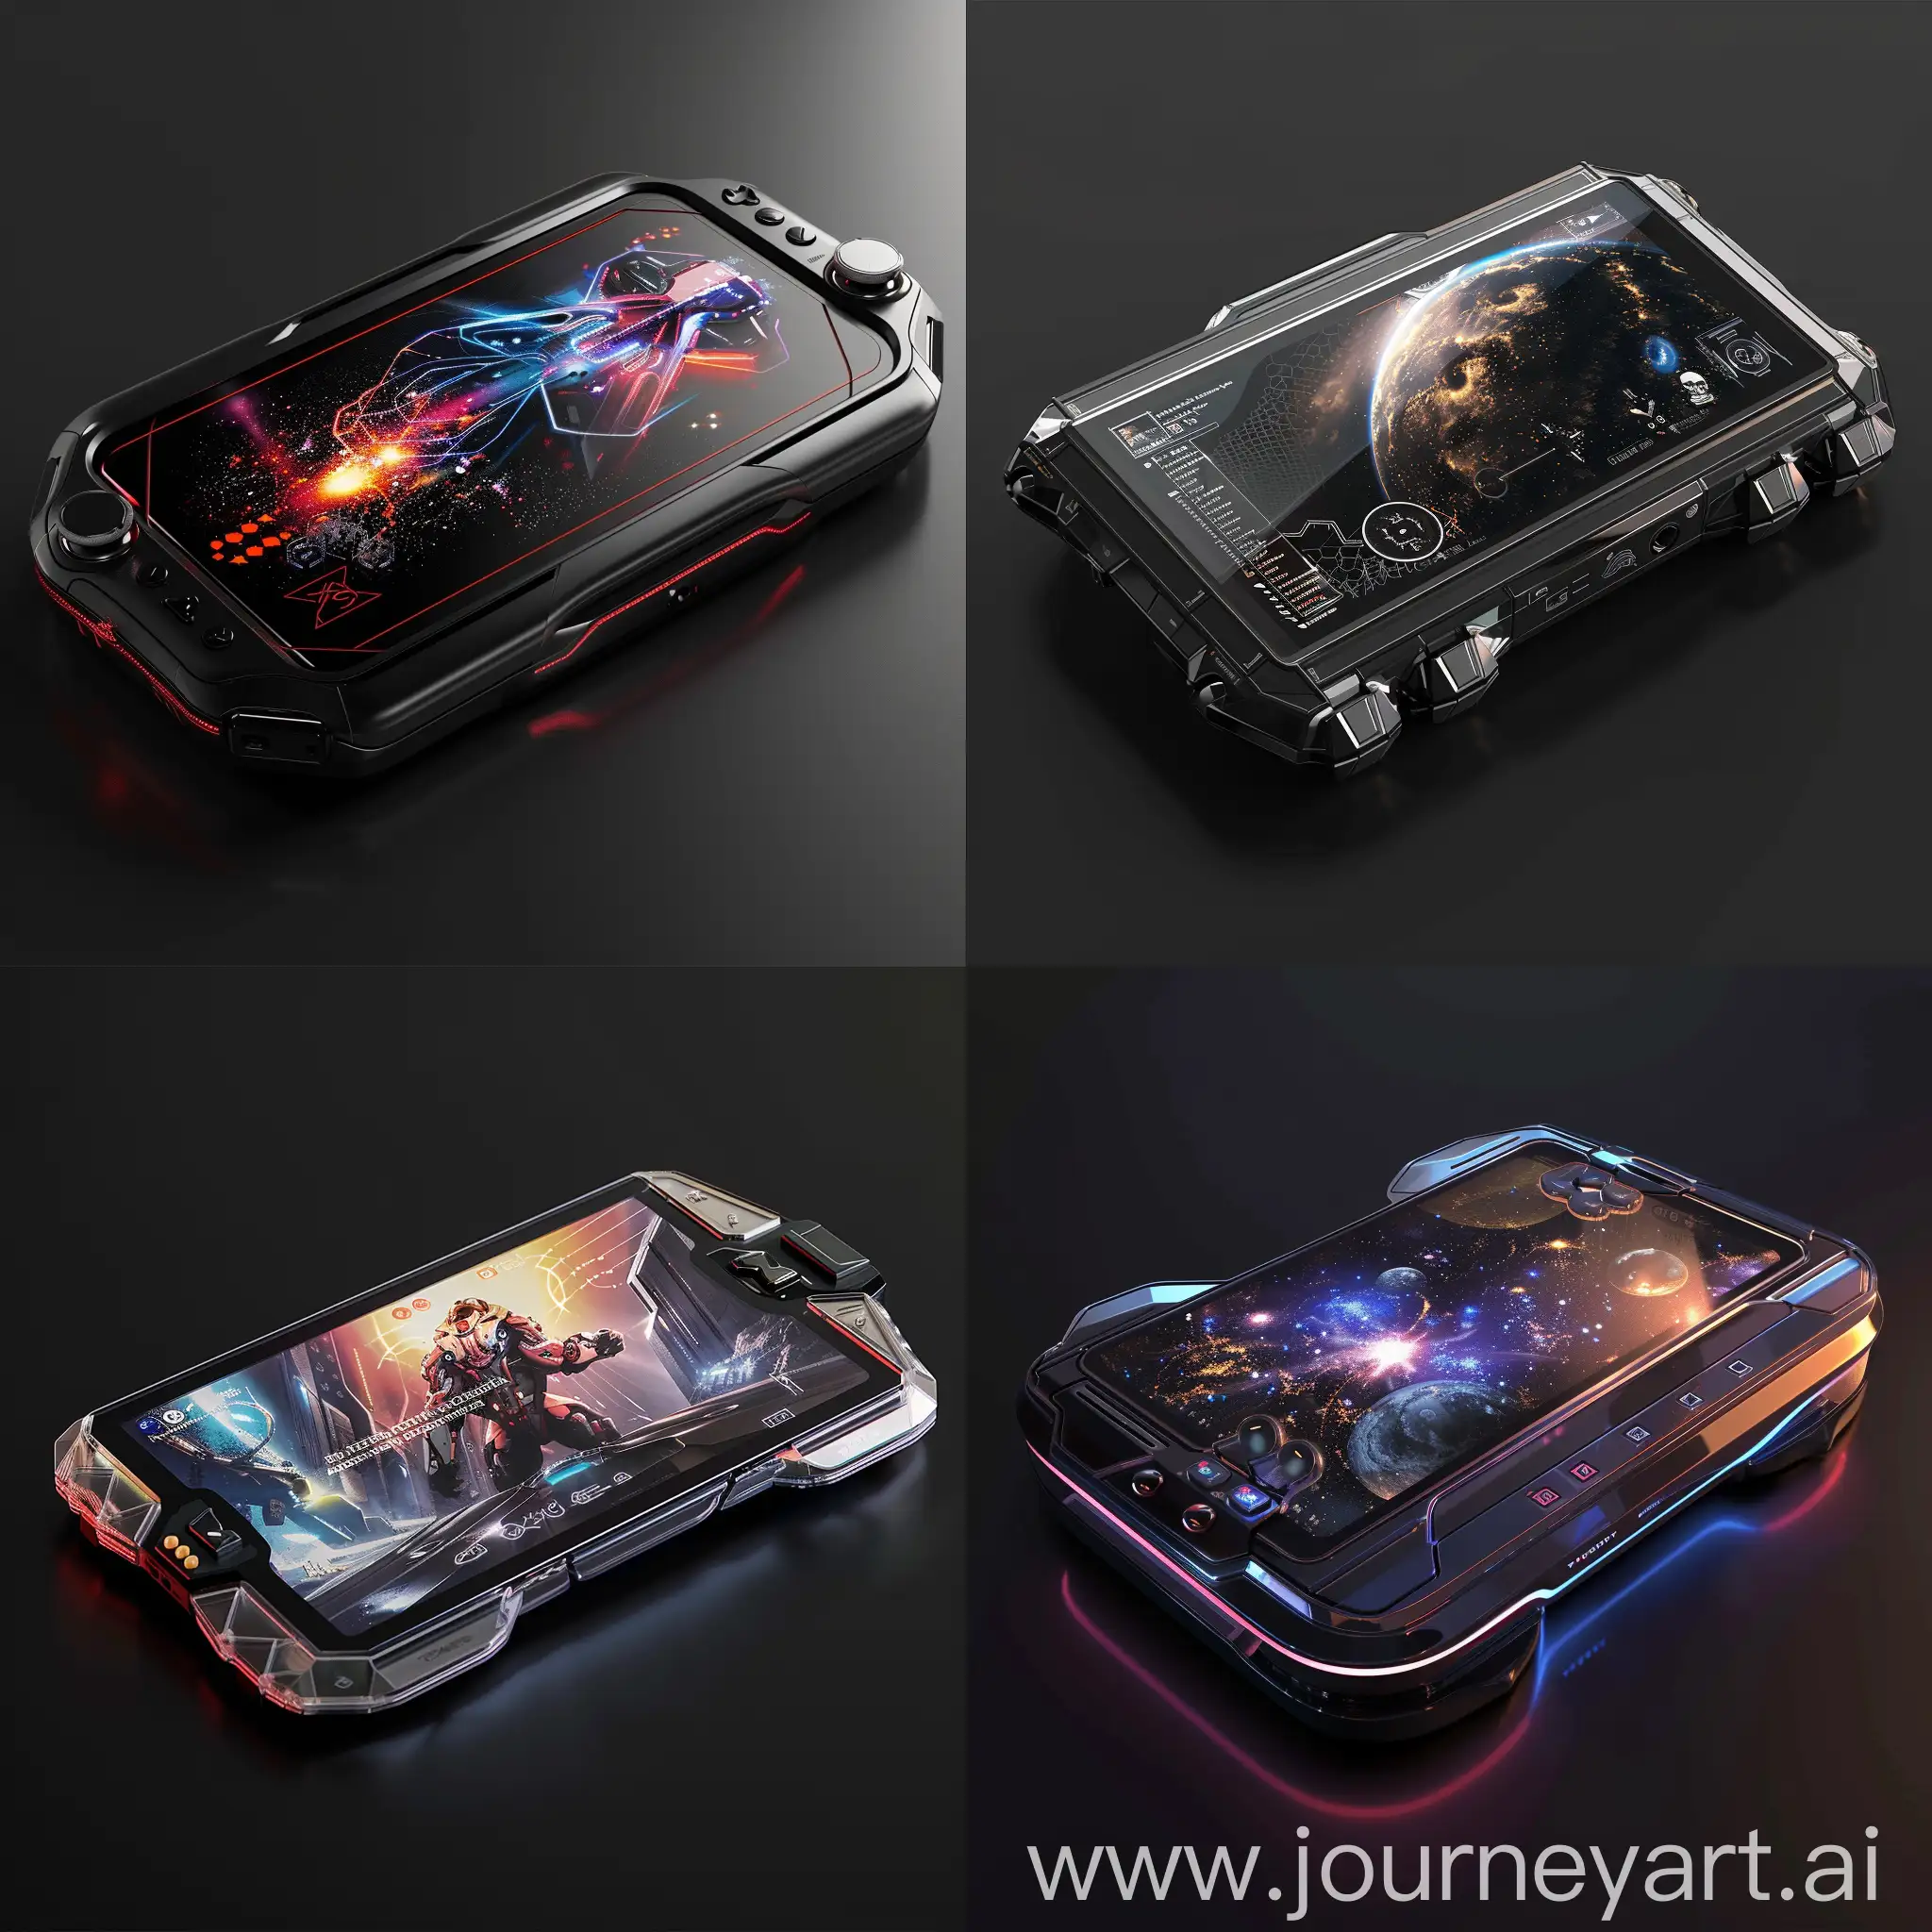 Futuristic-SciFi-Portable-Gaming-Console-with-Advanced-Technology-Features